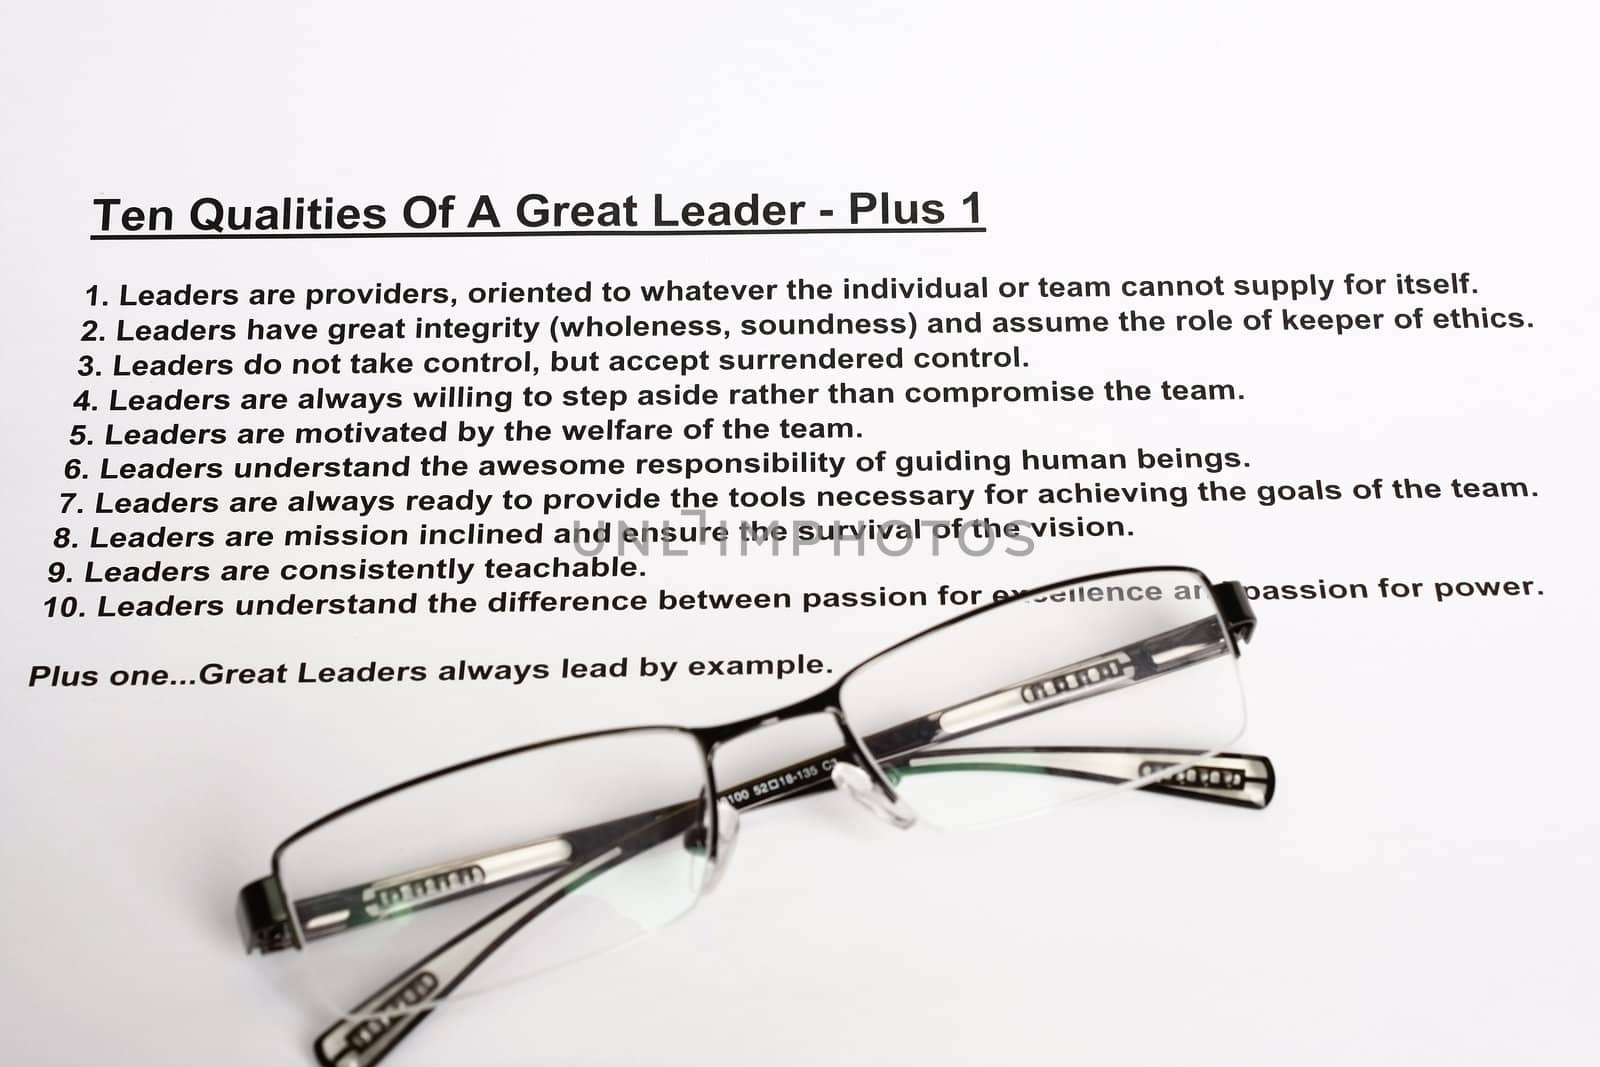 Ten qualities of a great leader - plus 1 concept